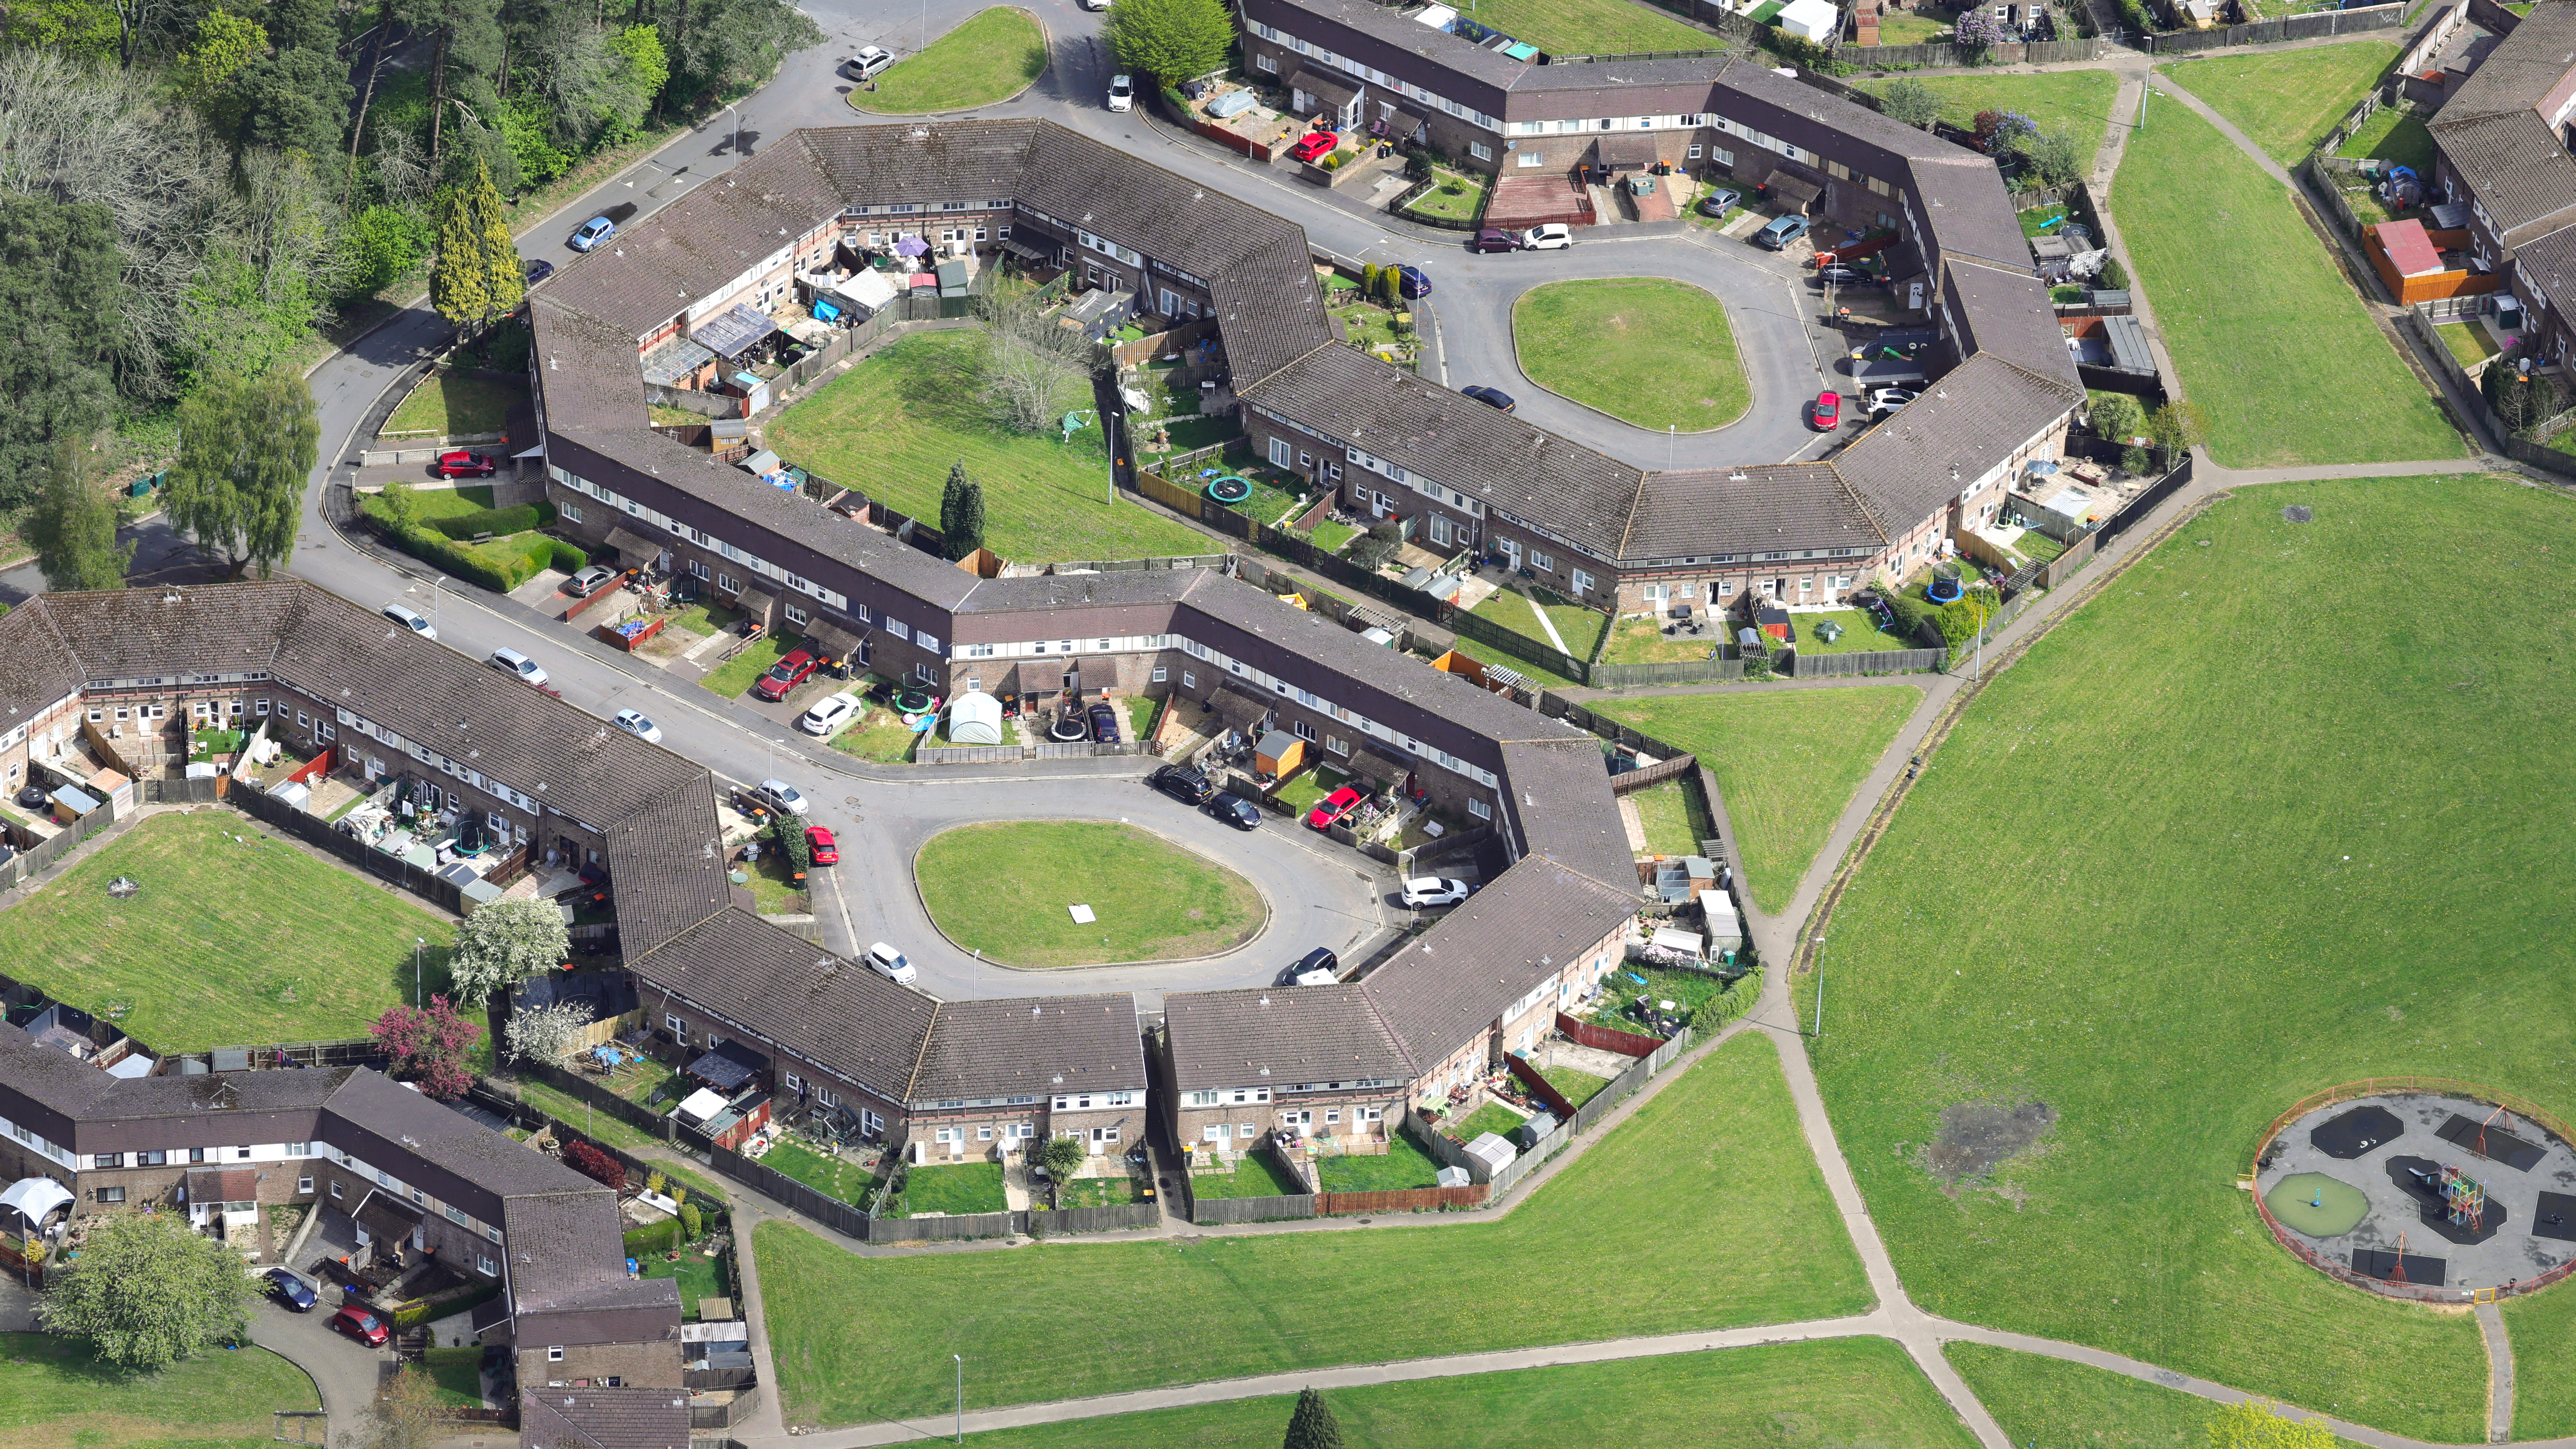 Council housing and private homes in a snake-like design